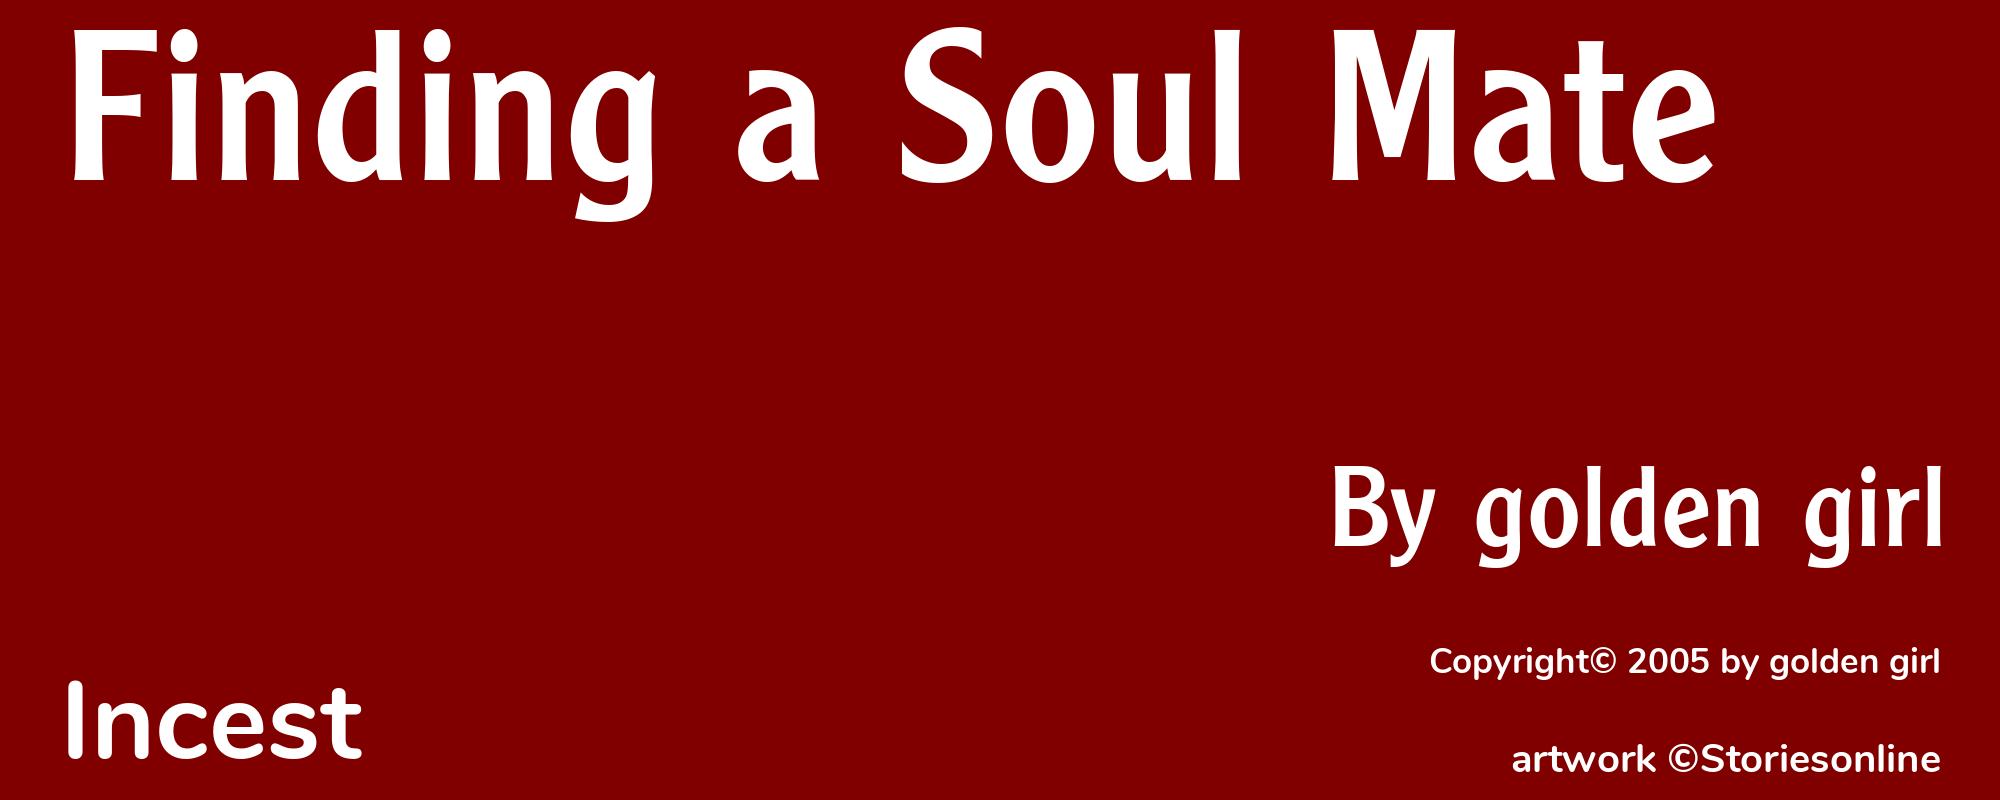 Finding a Soul Mate - Cover